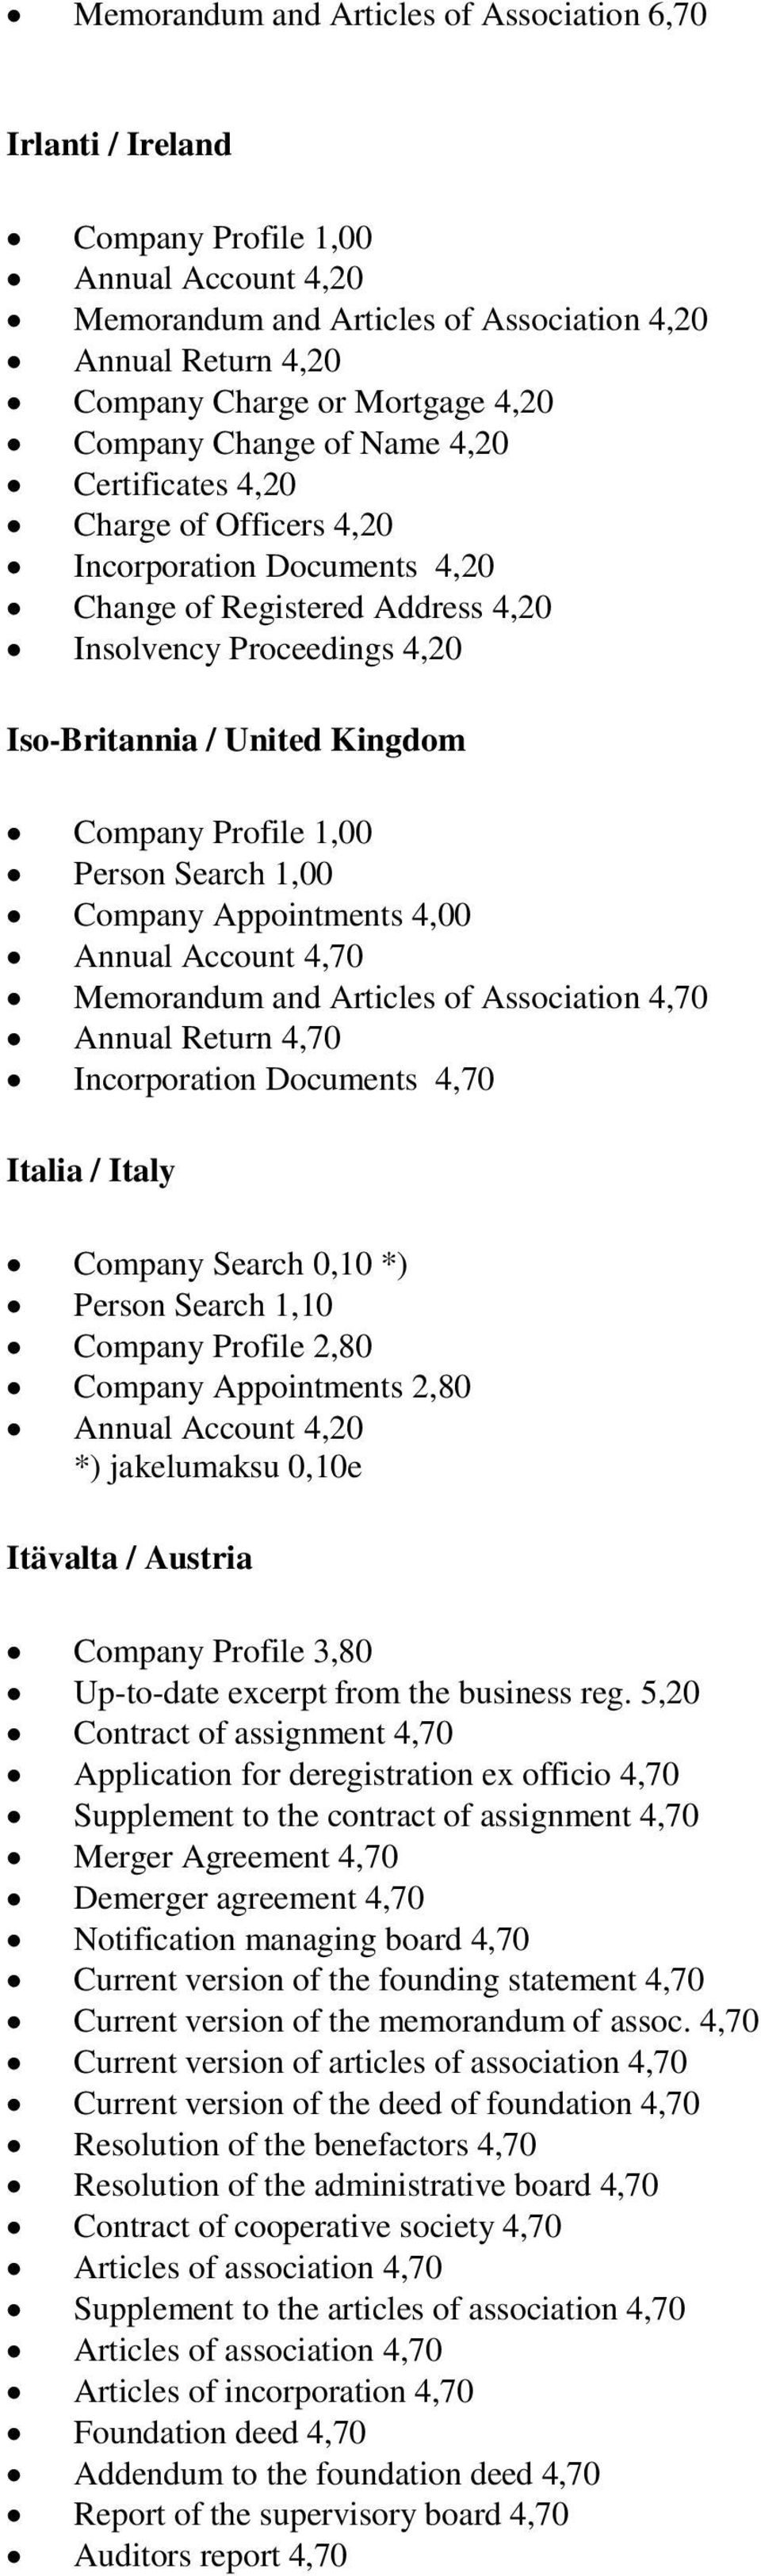 Profile 1,00 Person Search 1,00 Company Appointments 4,00 Annual Account 4,70 Memorandum and Articles of Association 4,70 Annual Return 4,70 Incorporation Documents 4,70 Italia / Italy Company Search